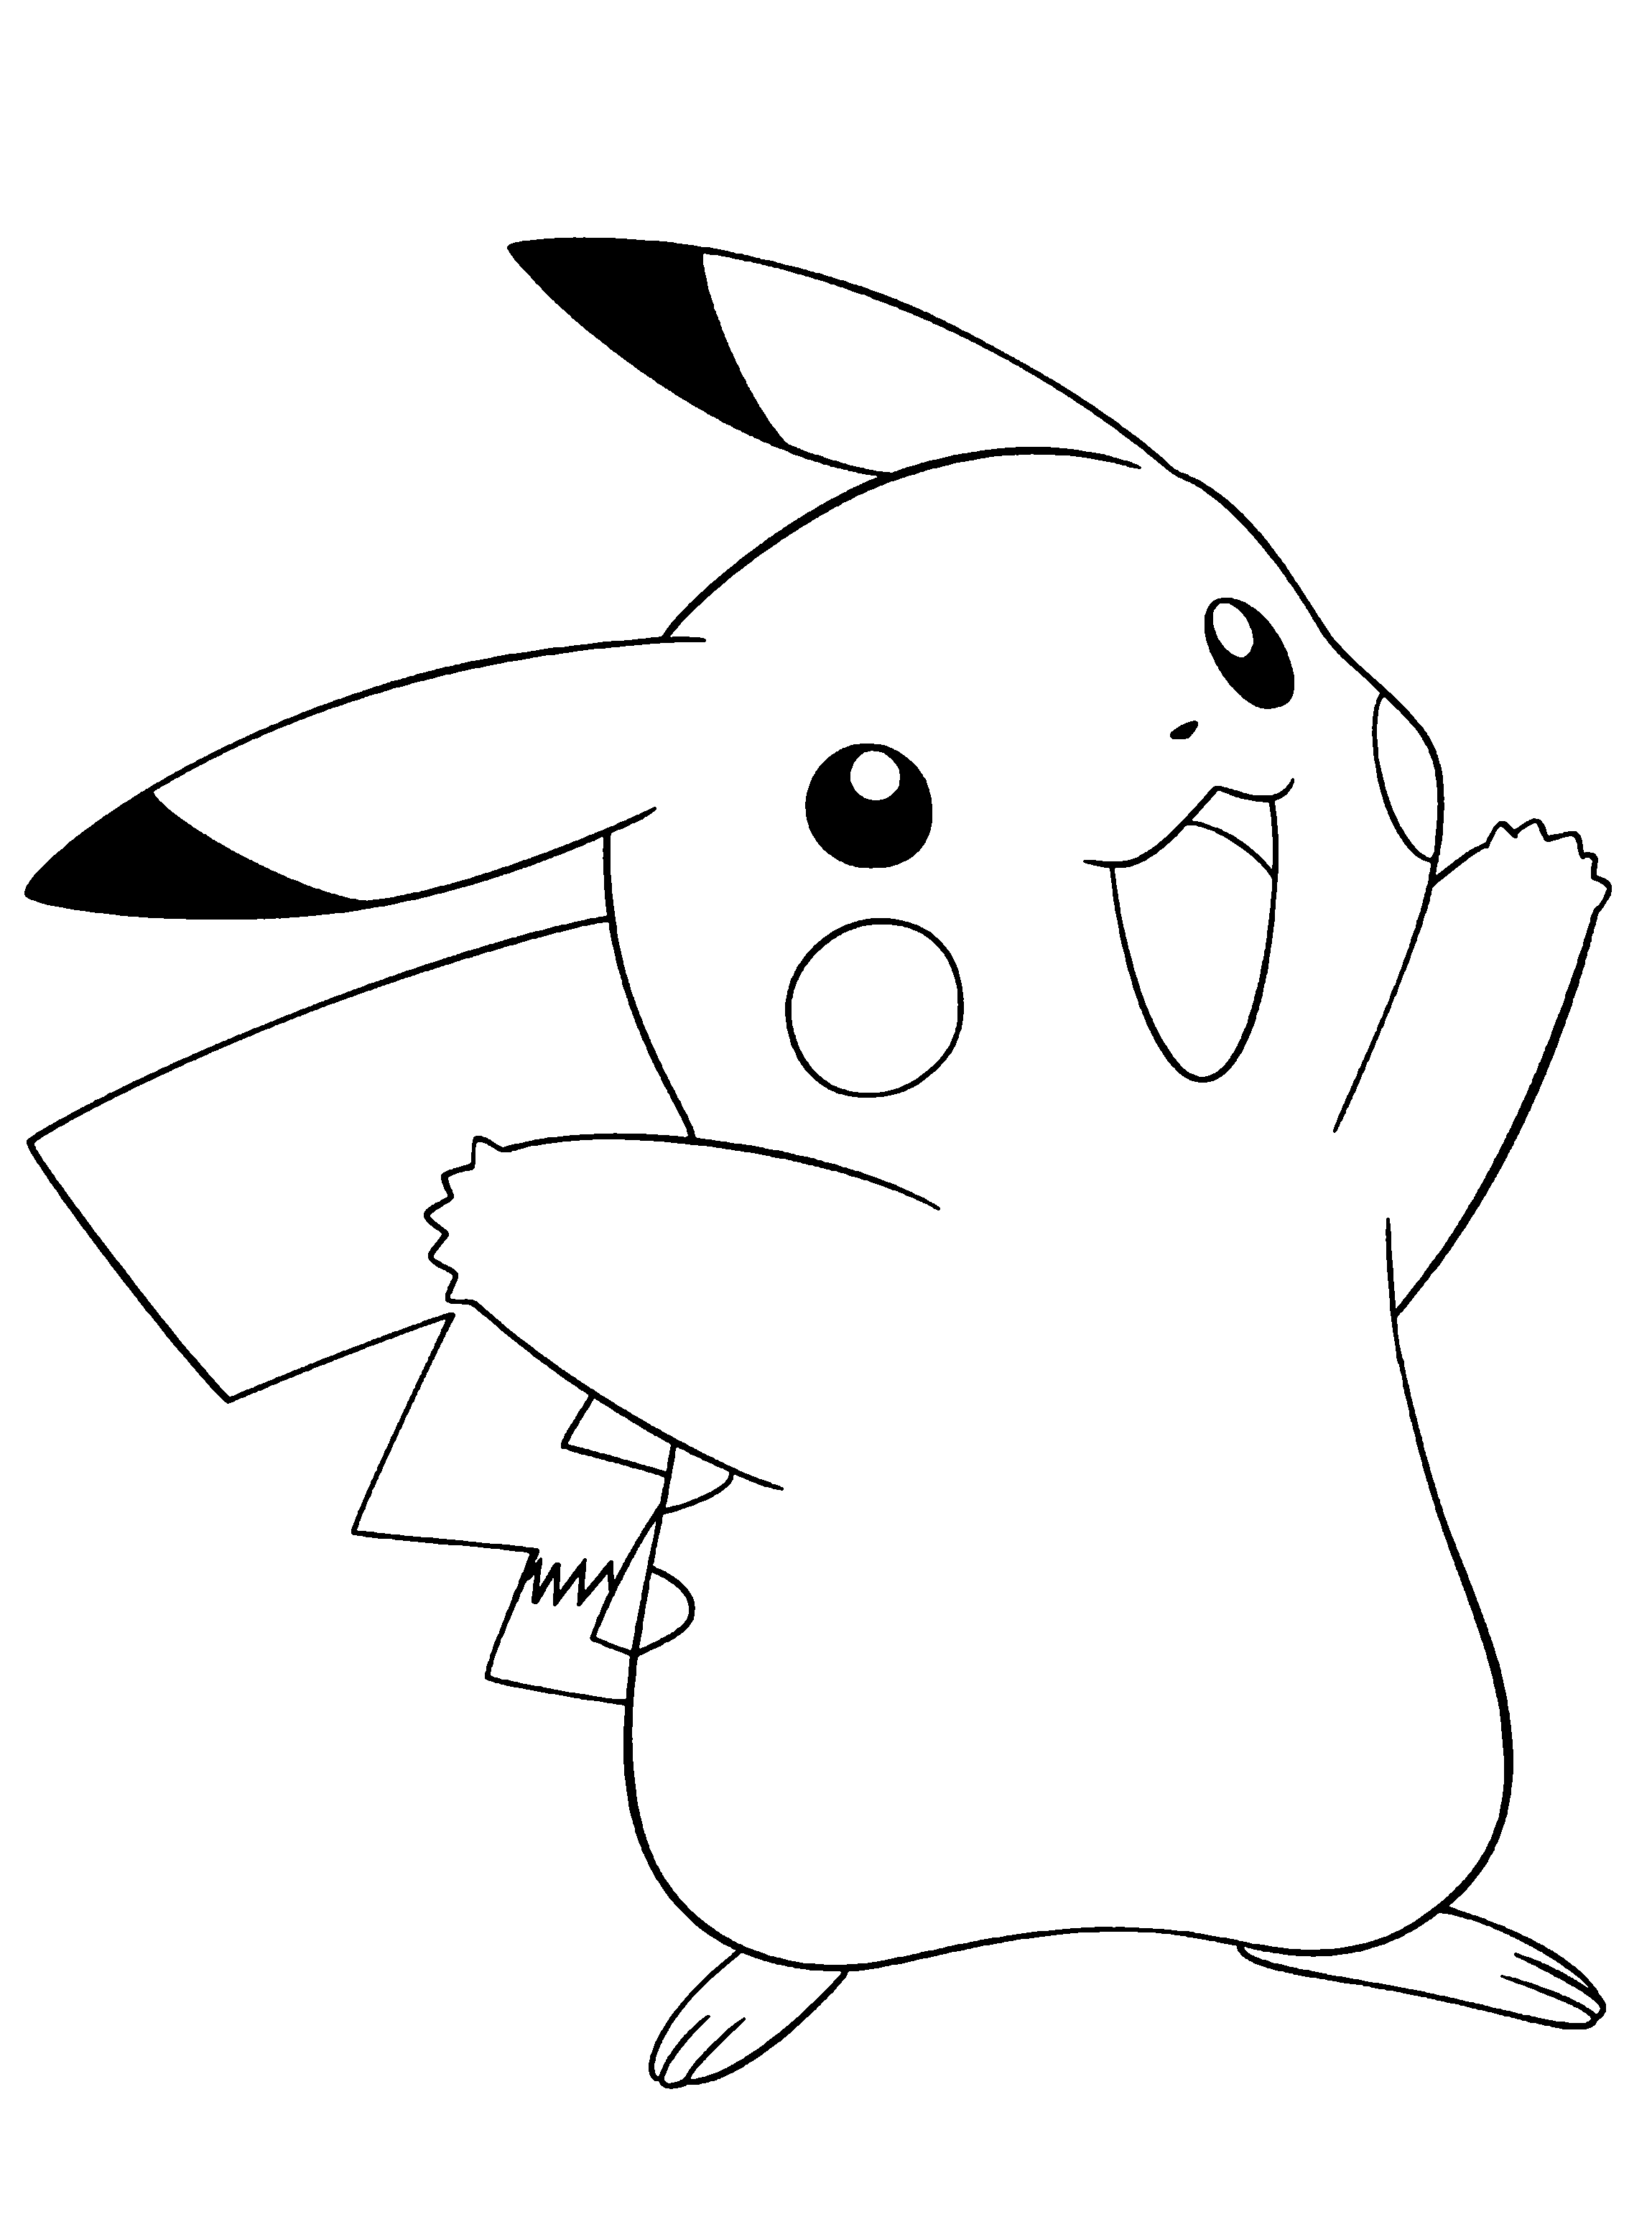 animated-coloring-pages-pokemon-image-0219